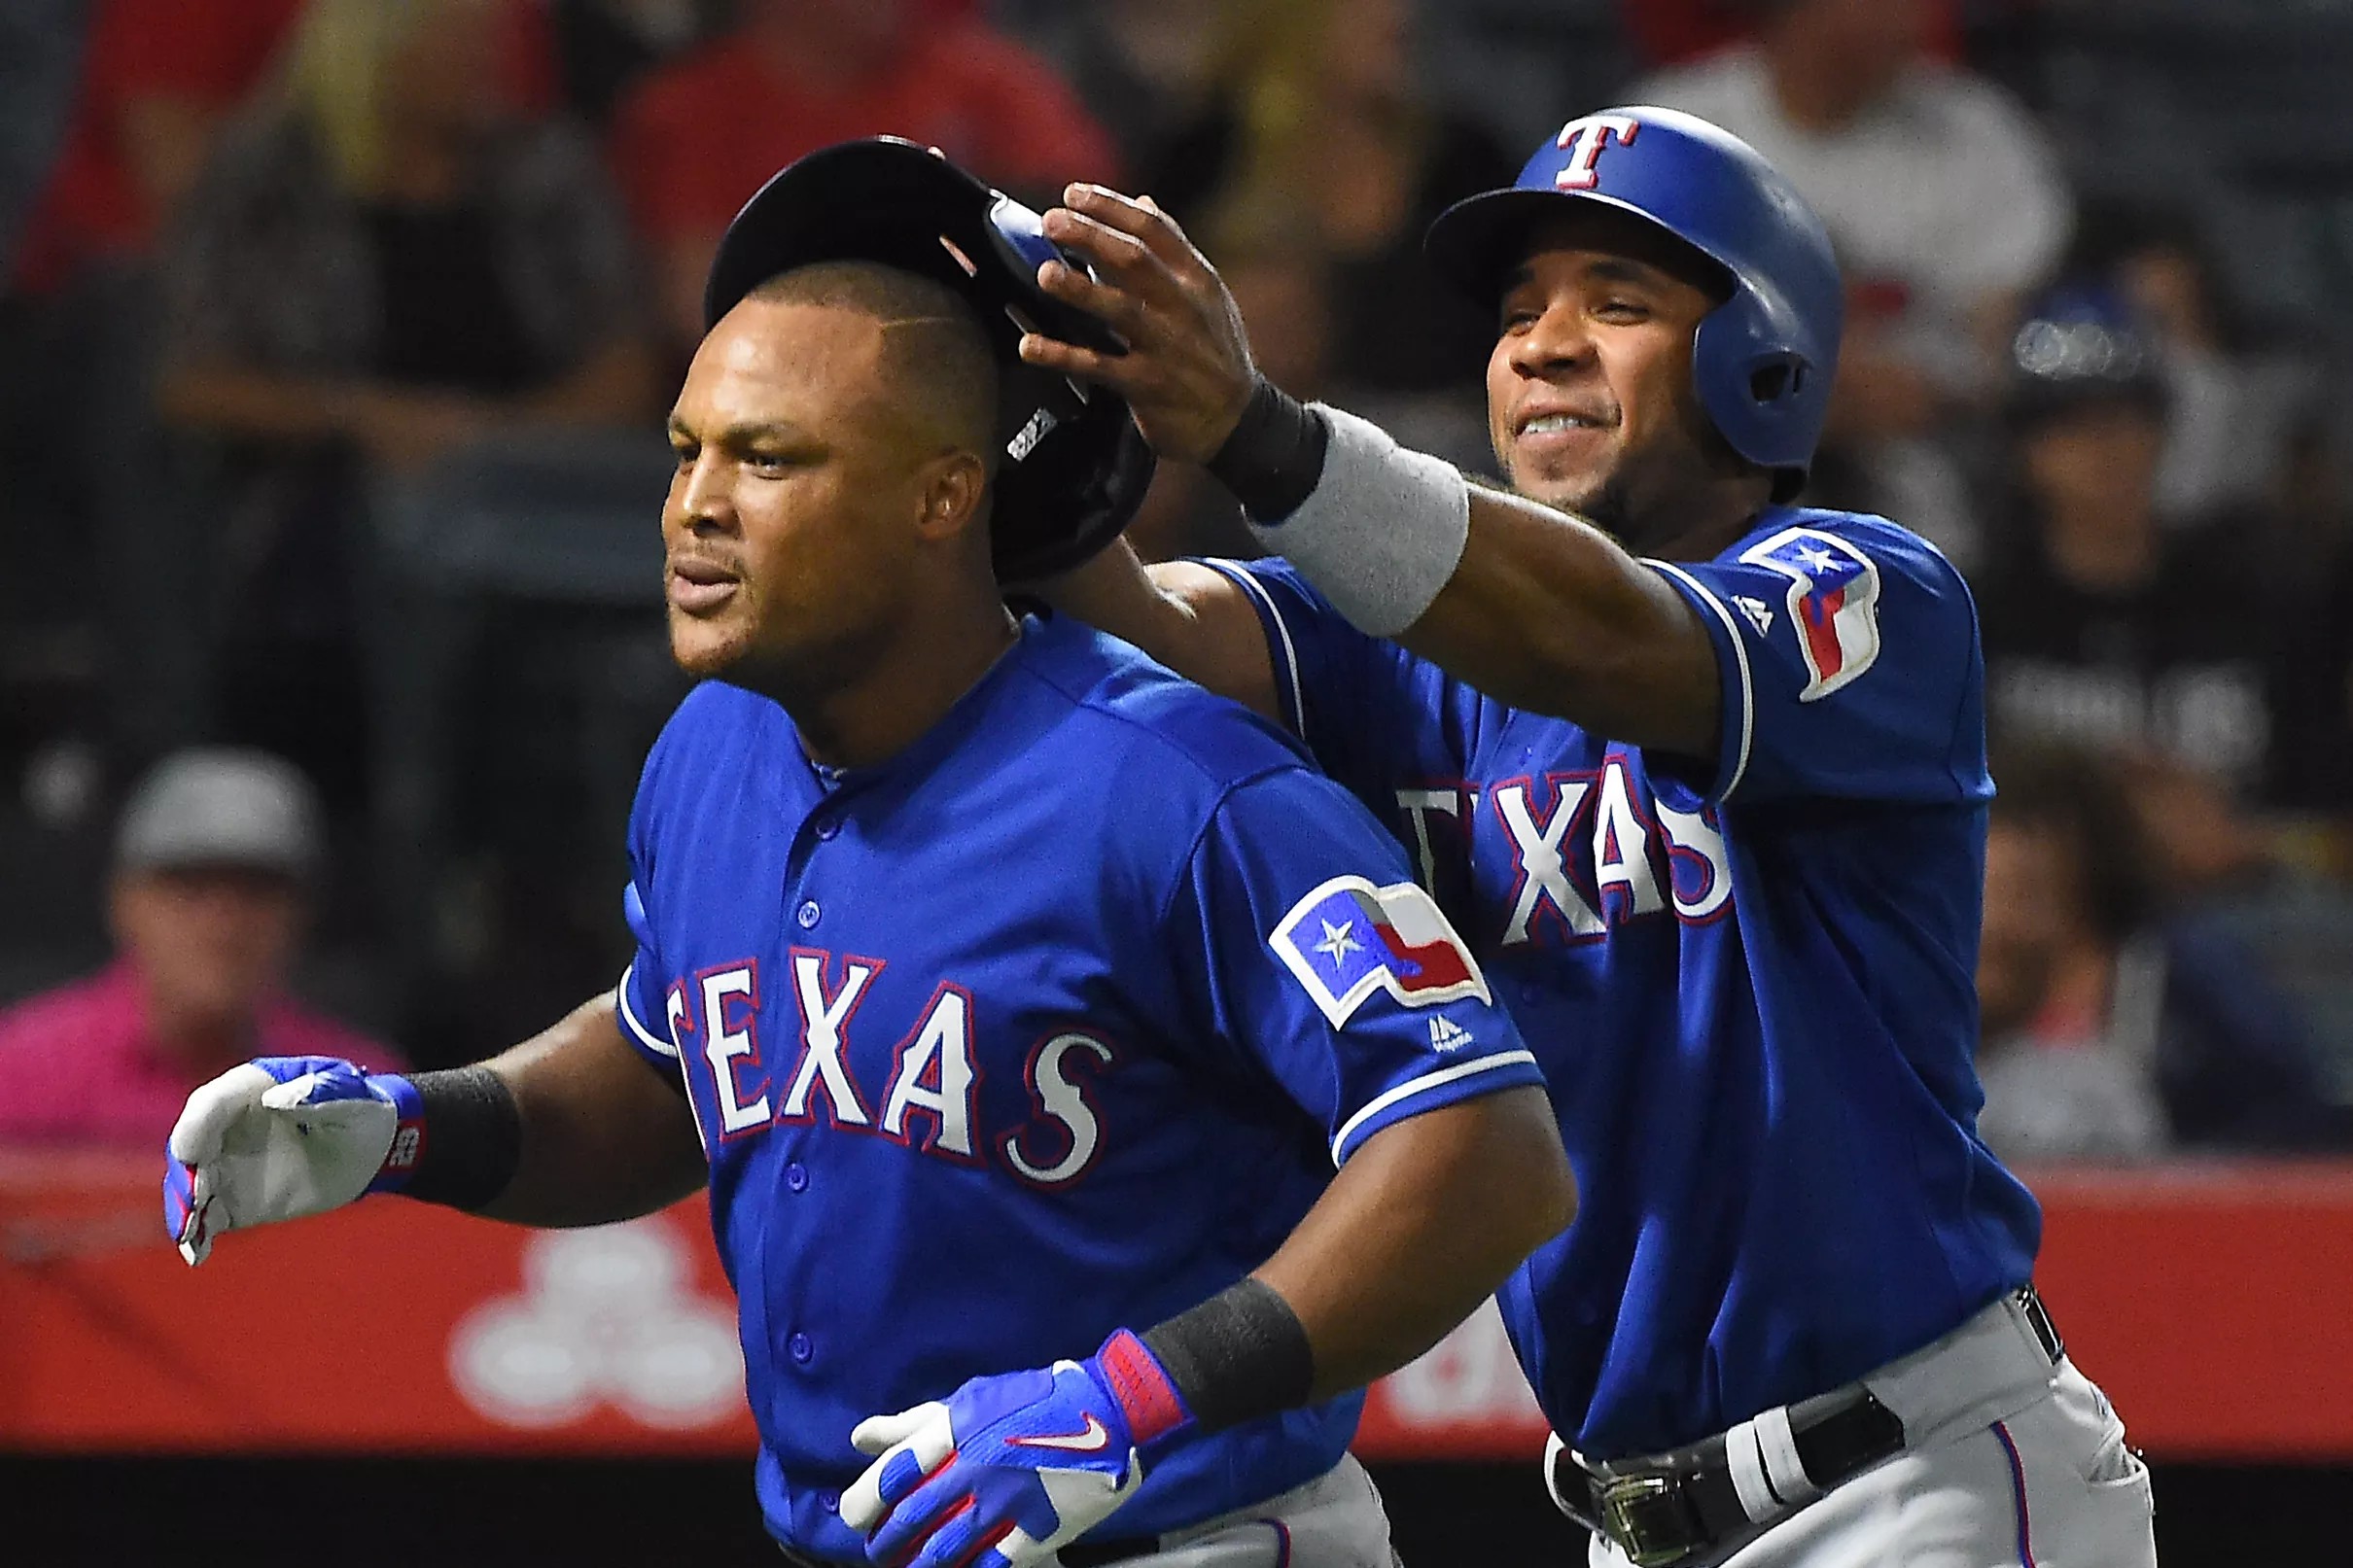 Taking a look at the performances of the 2017 Texas Rangers players